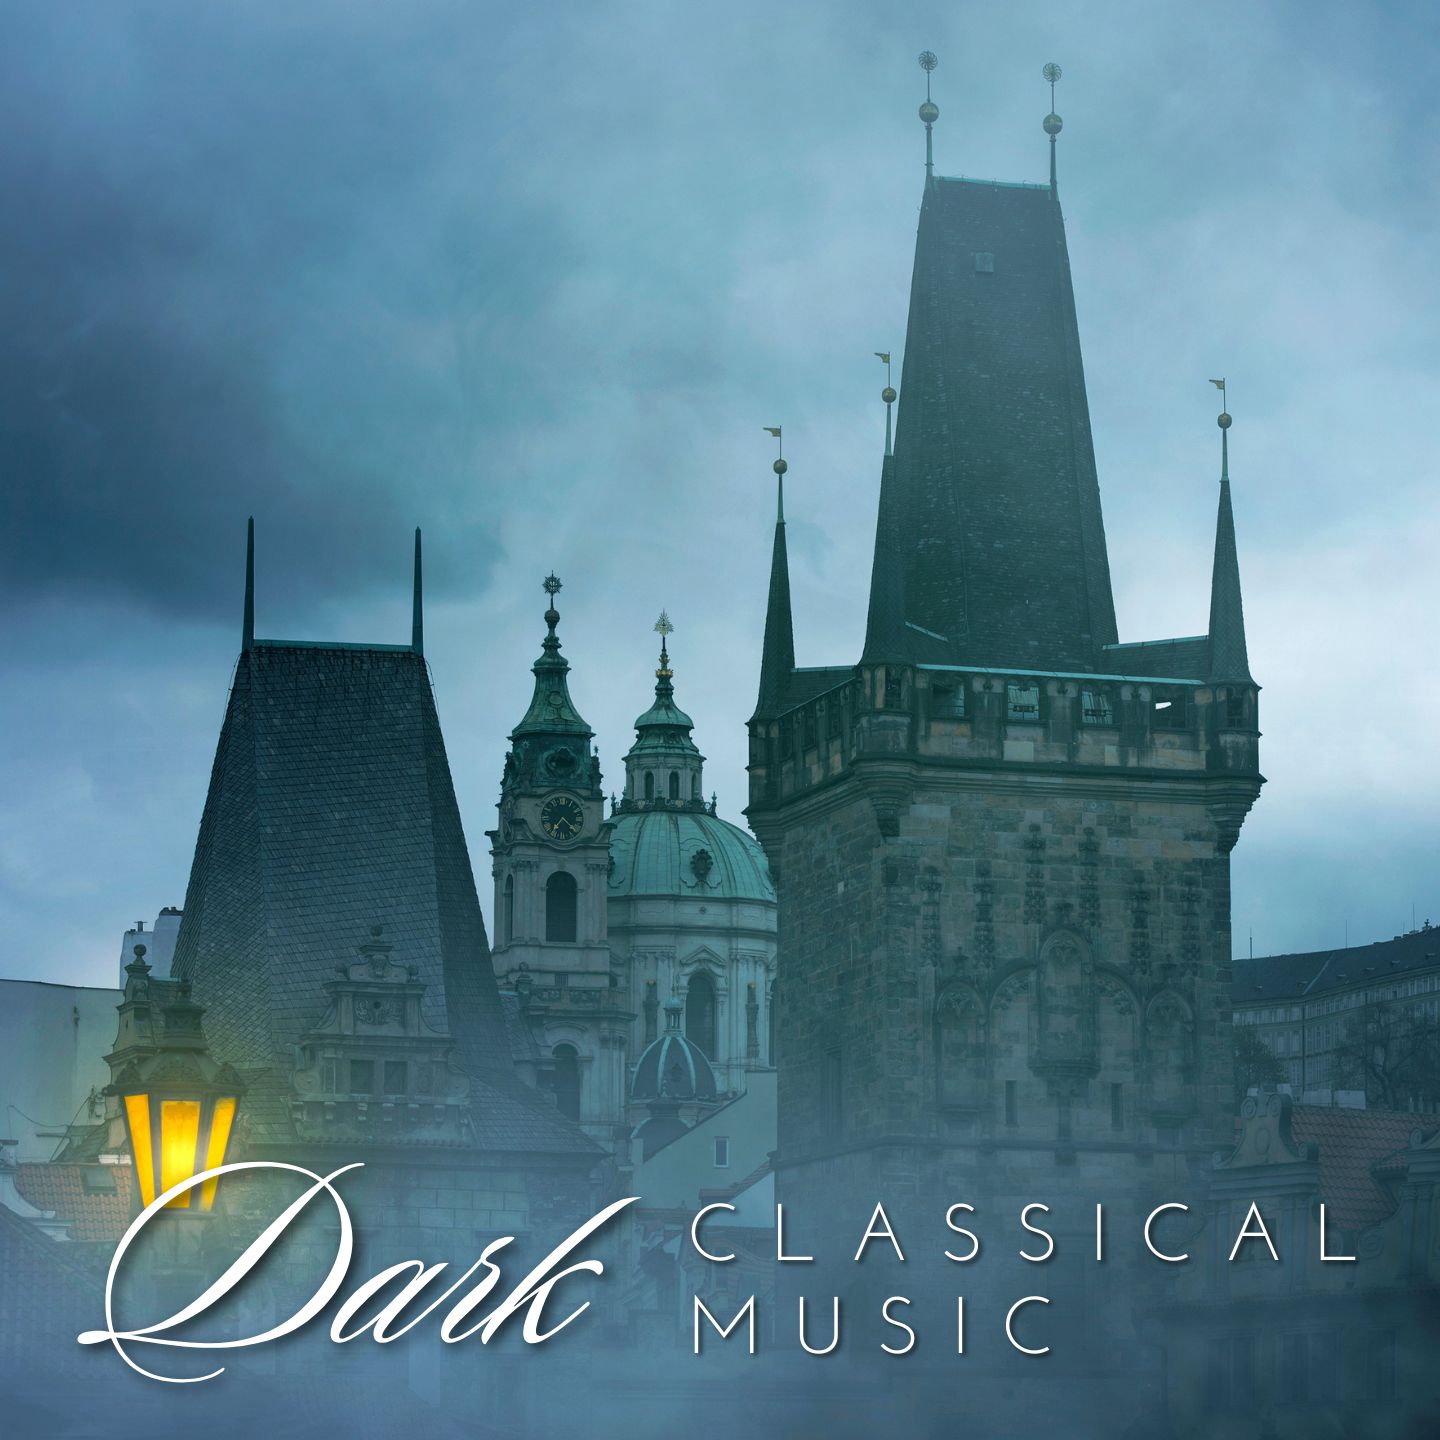 Dark Classical Music: Scary and Creepy